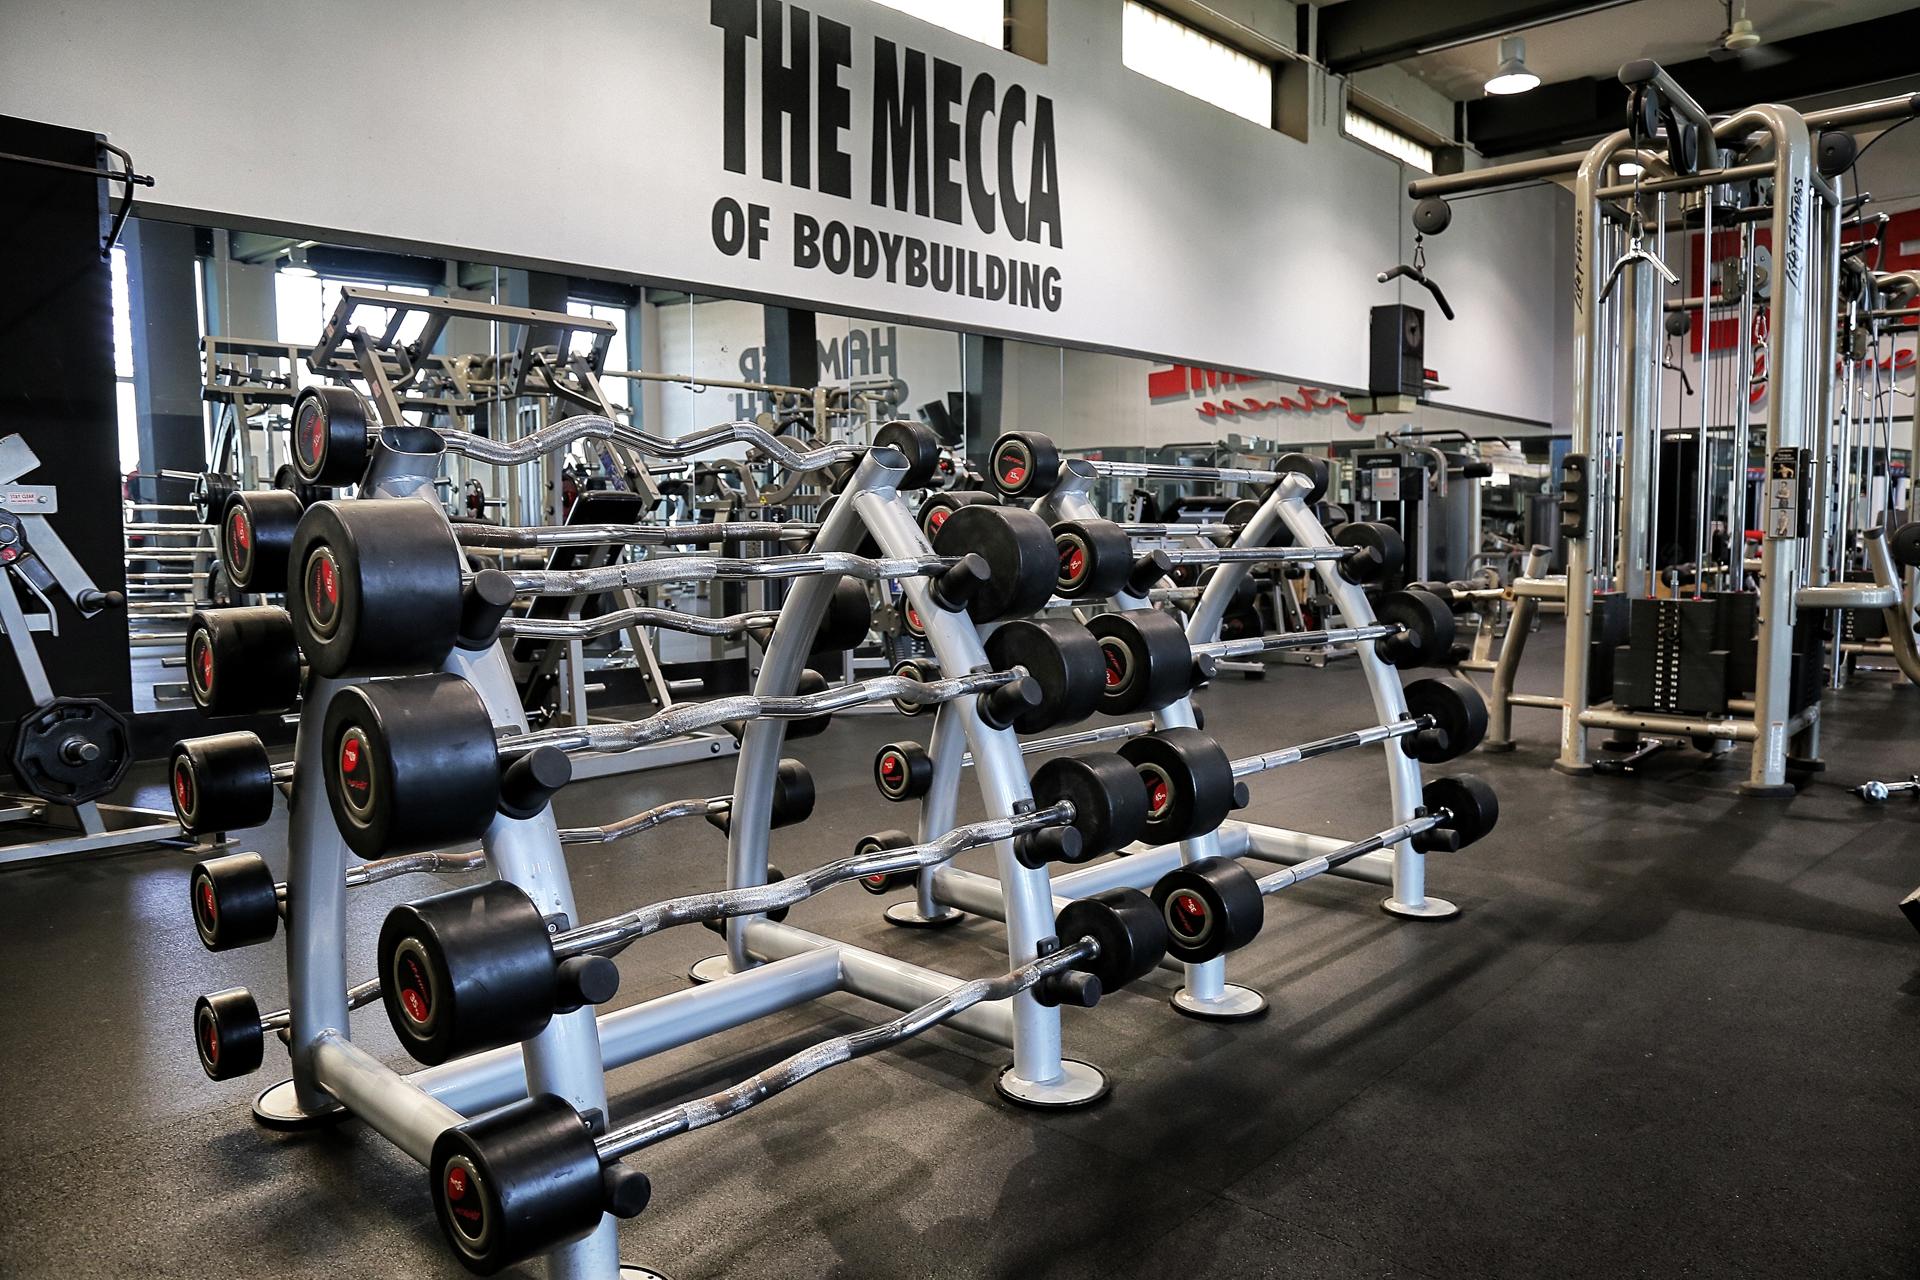 EXTREME FITNESS – The Mecca of Bodybuilding